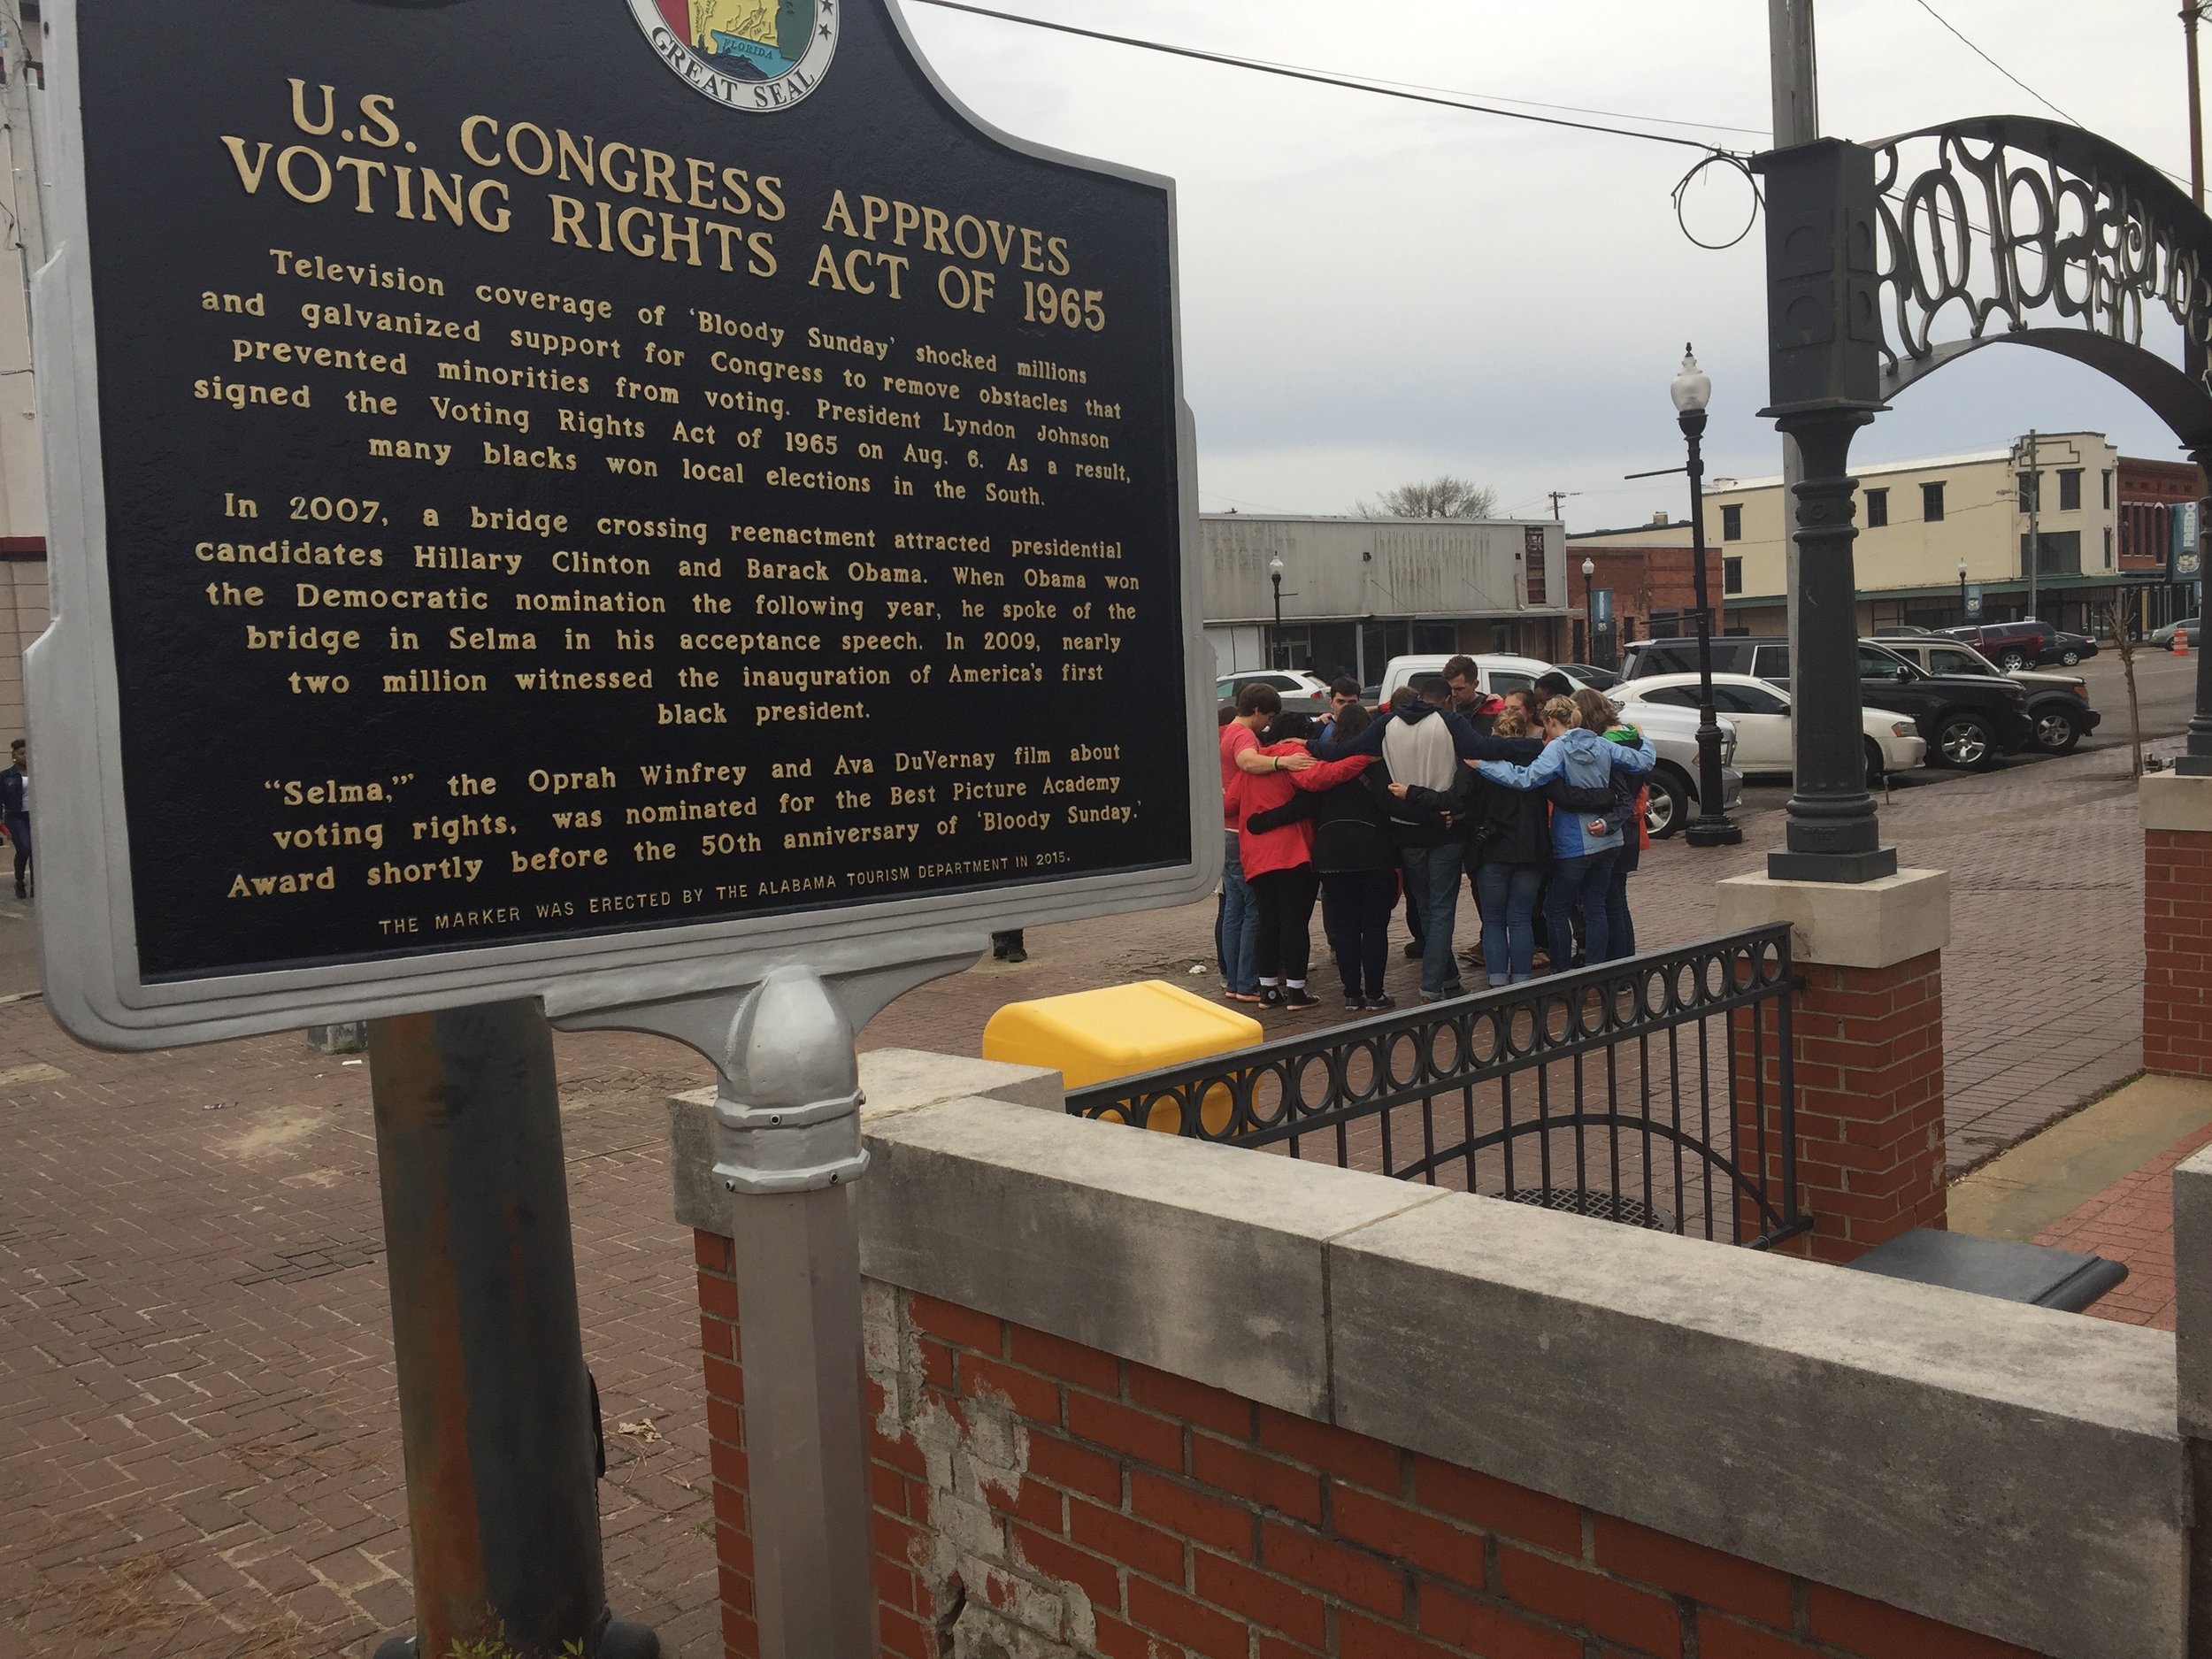  Selma: A recently erected plaque near the Edmund Pettus Bridge, site of the 1965 "Bloody Sunday" violence.   